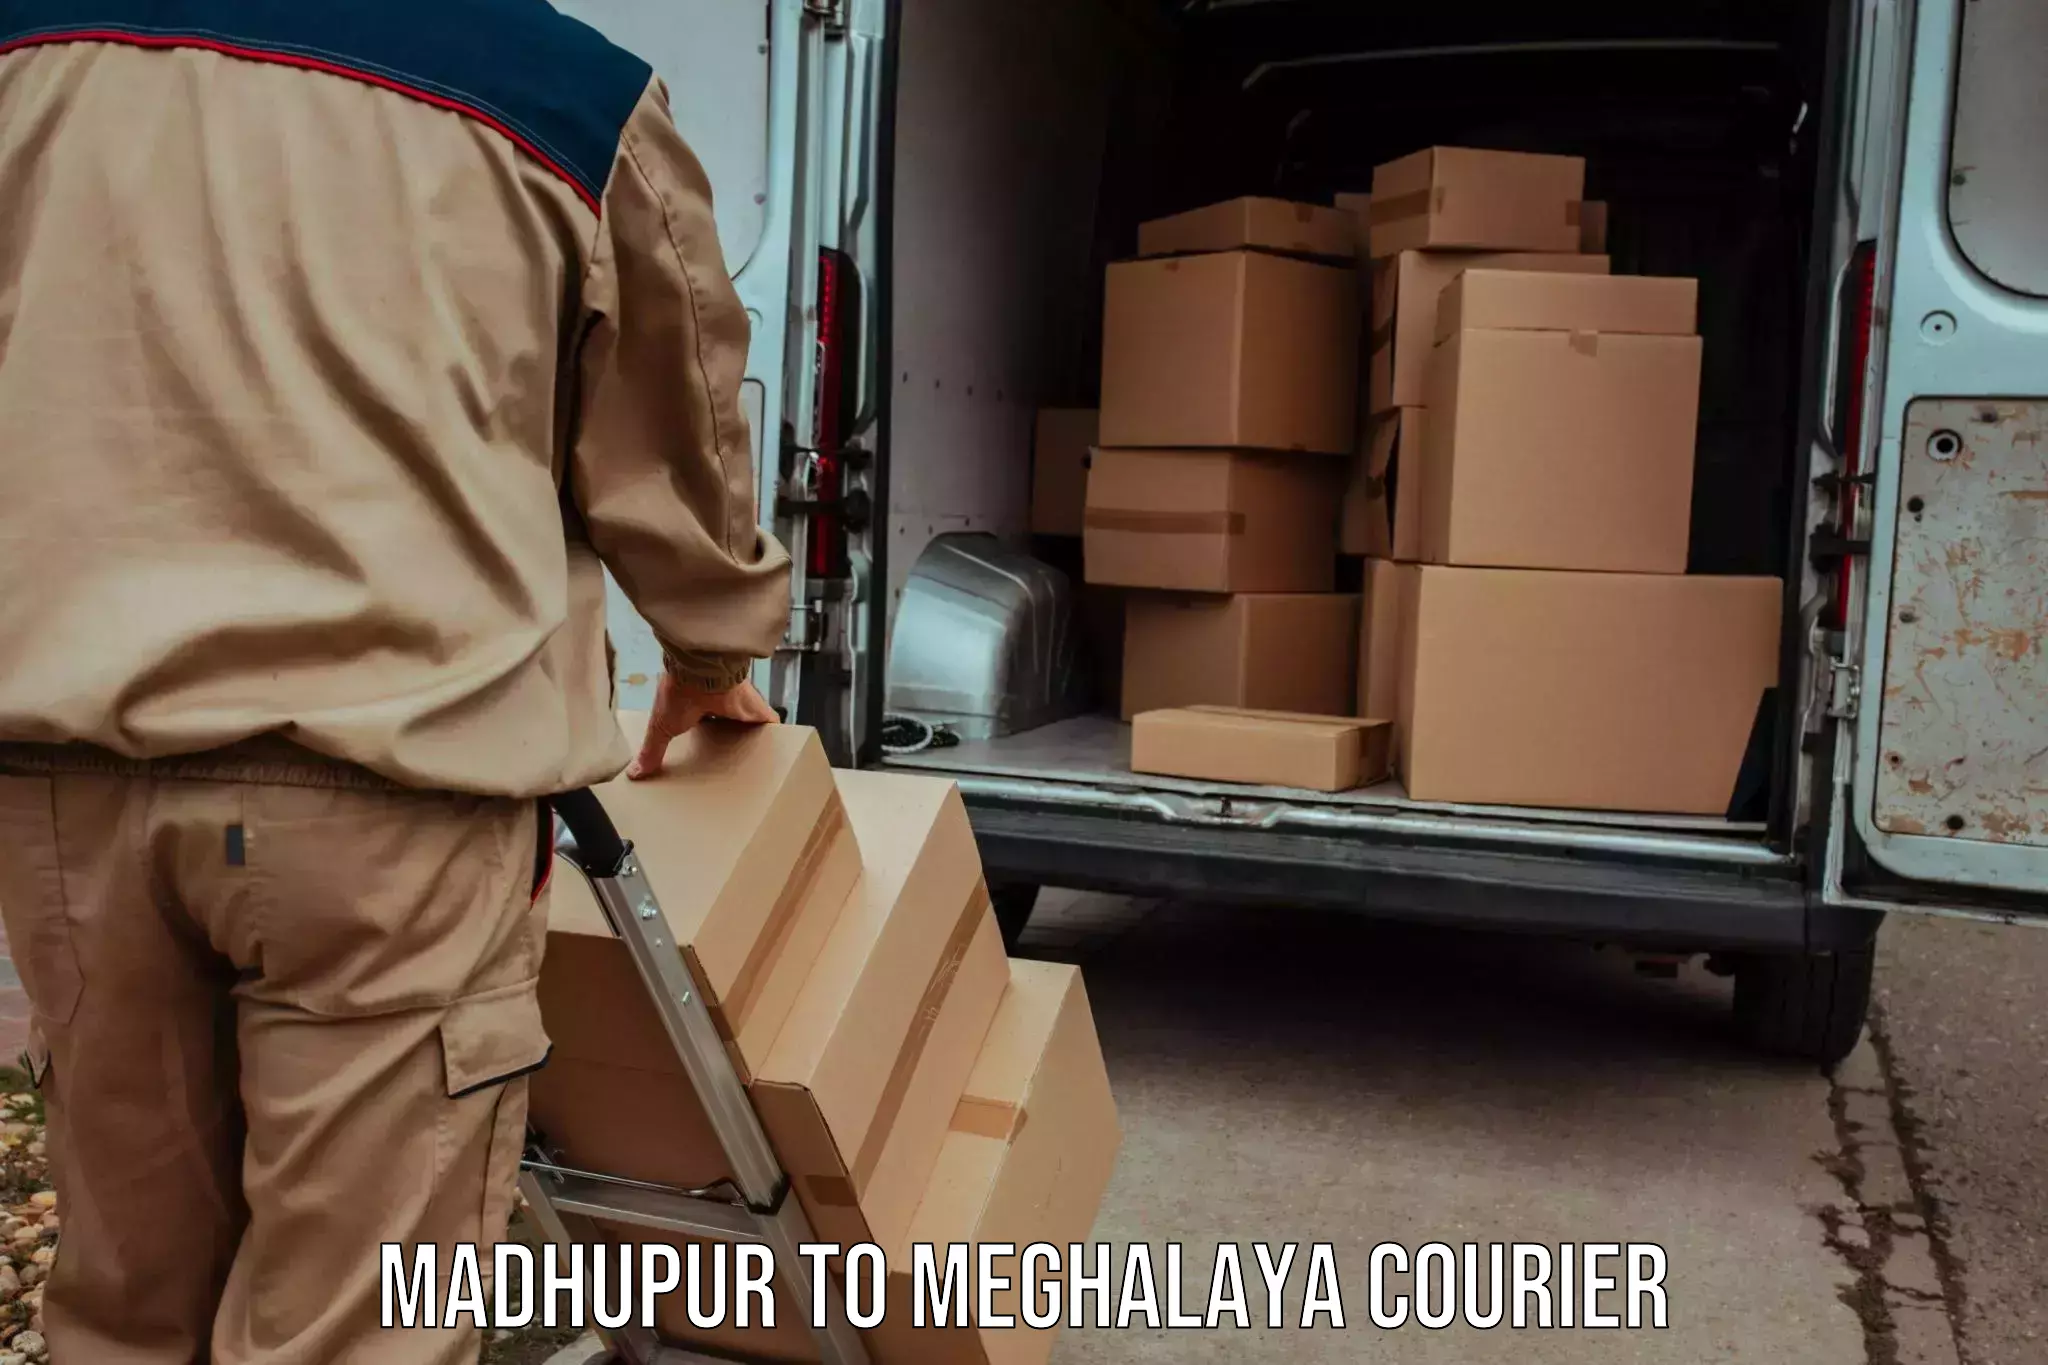 Next-day delivery options Madhupur to Meghalaya